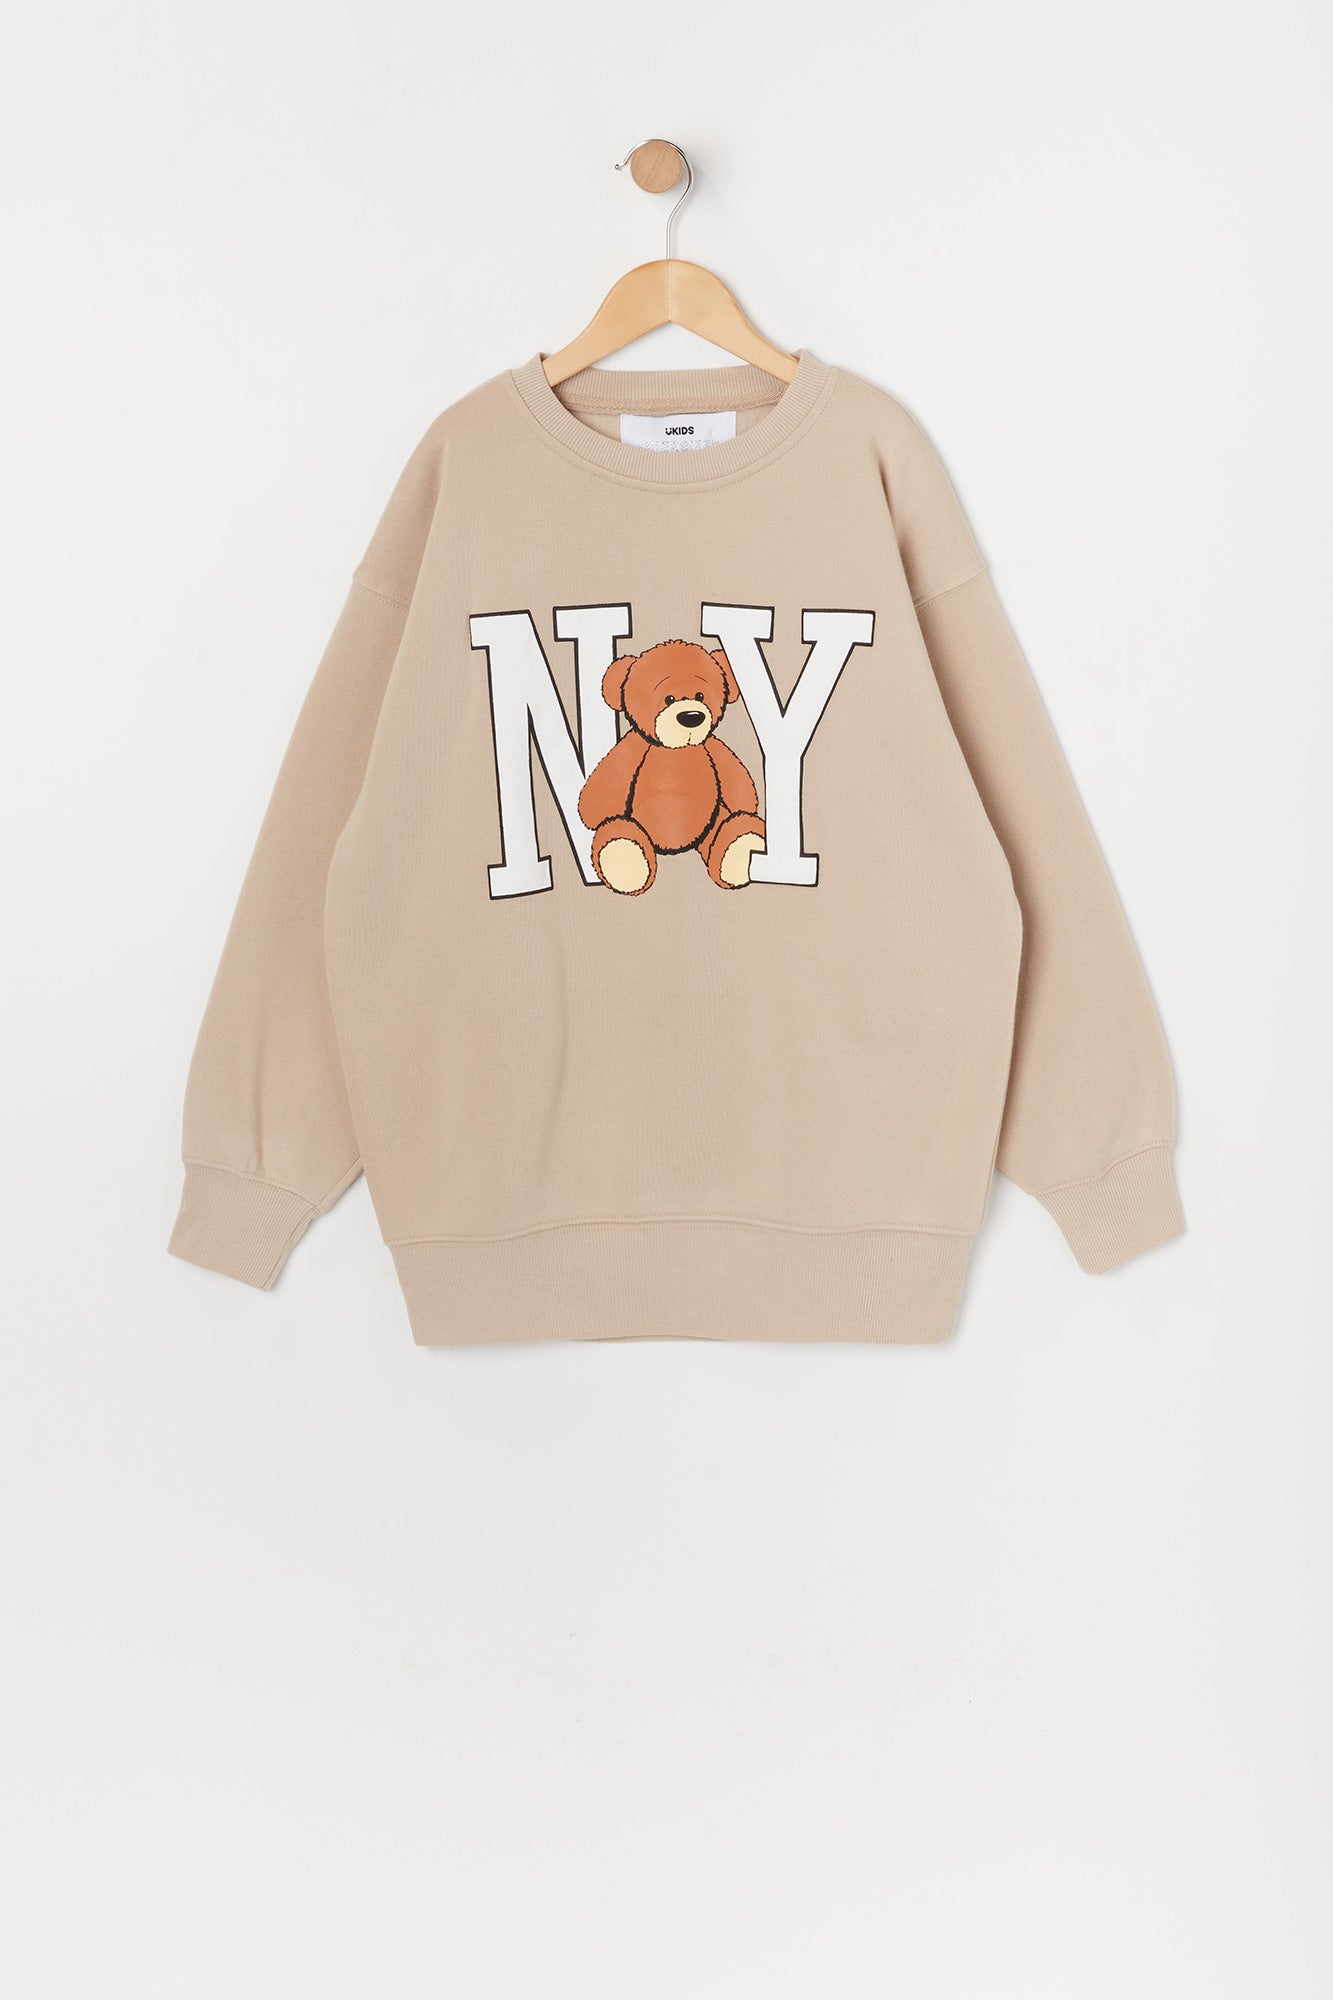 Girls Oversized Sweater – Urban Planet Teddy NY Graphic